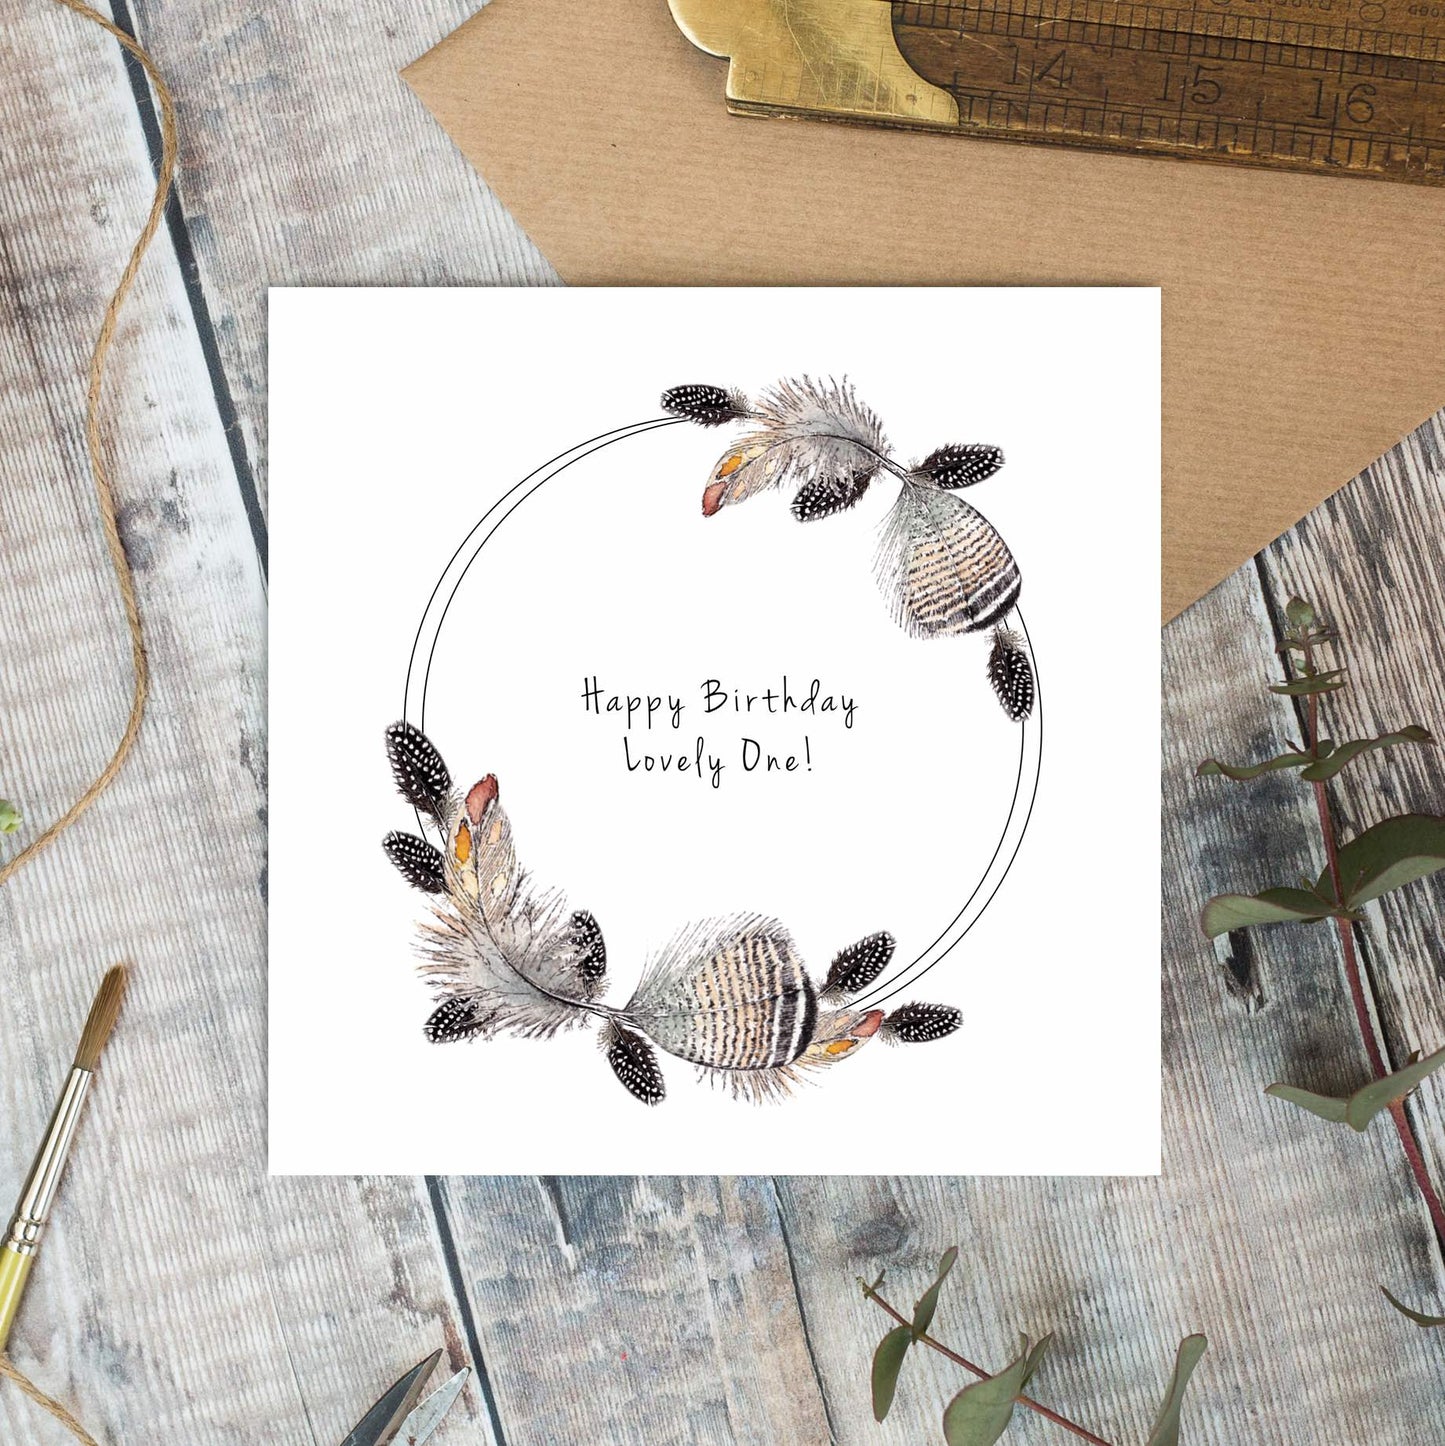 Happy Birthday Lovely One greeting card